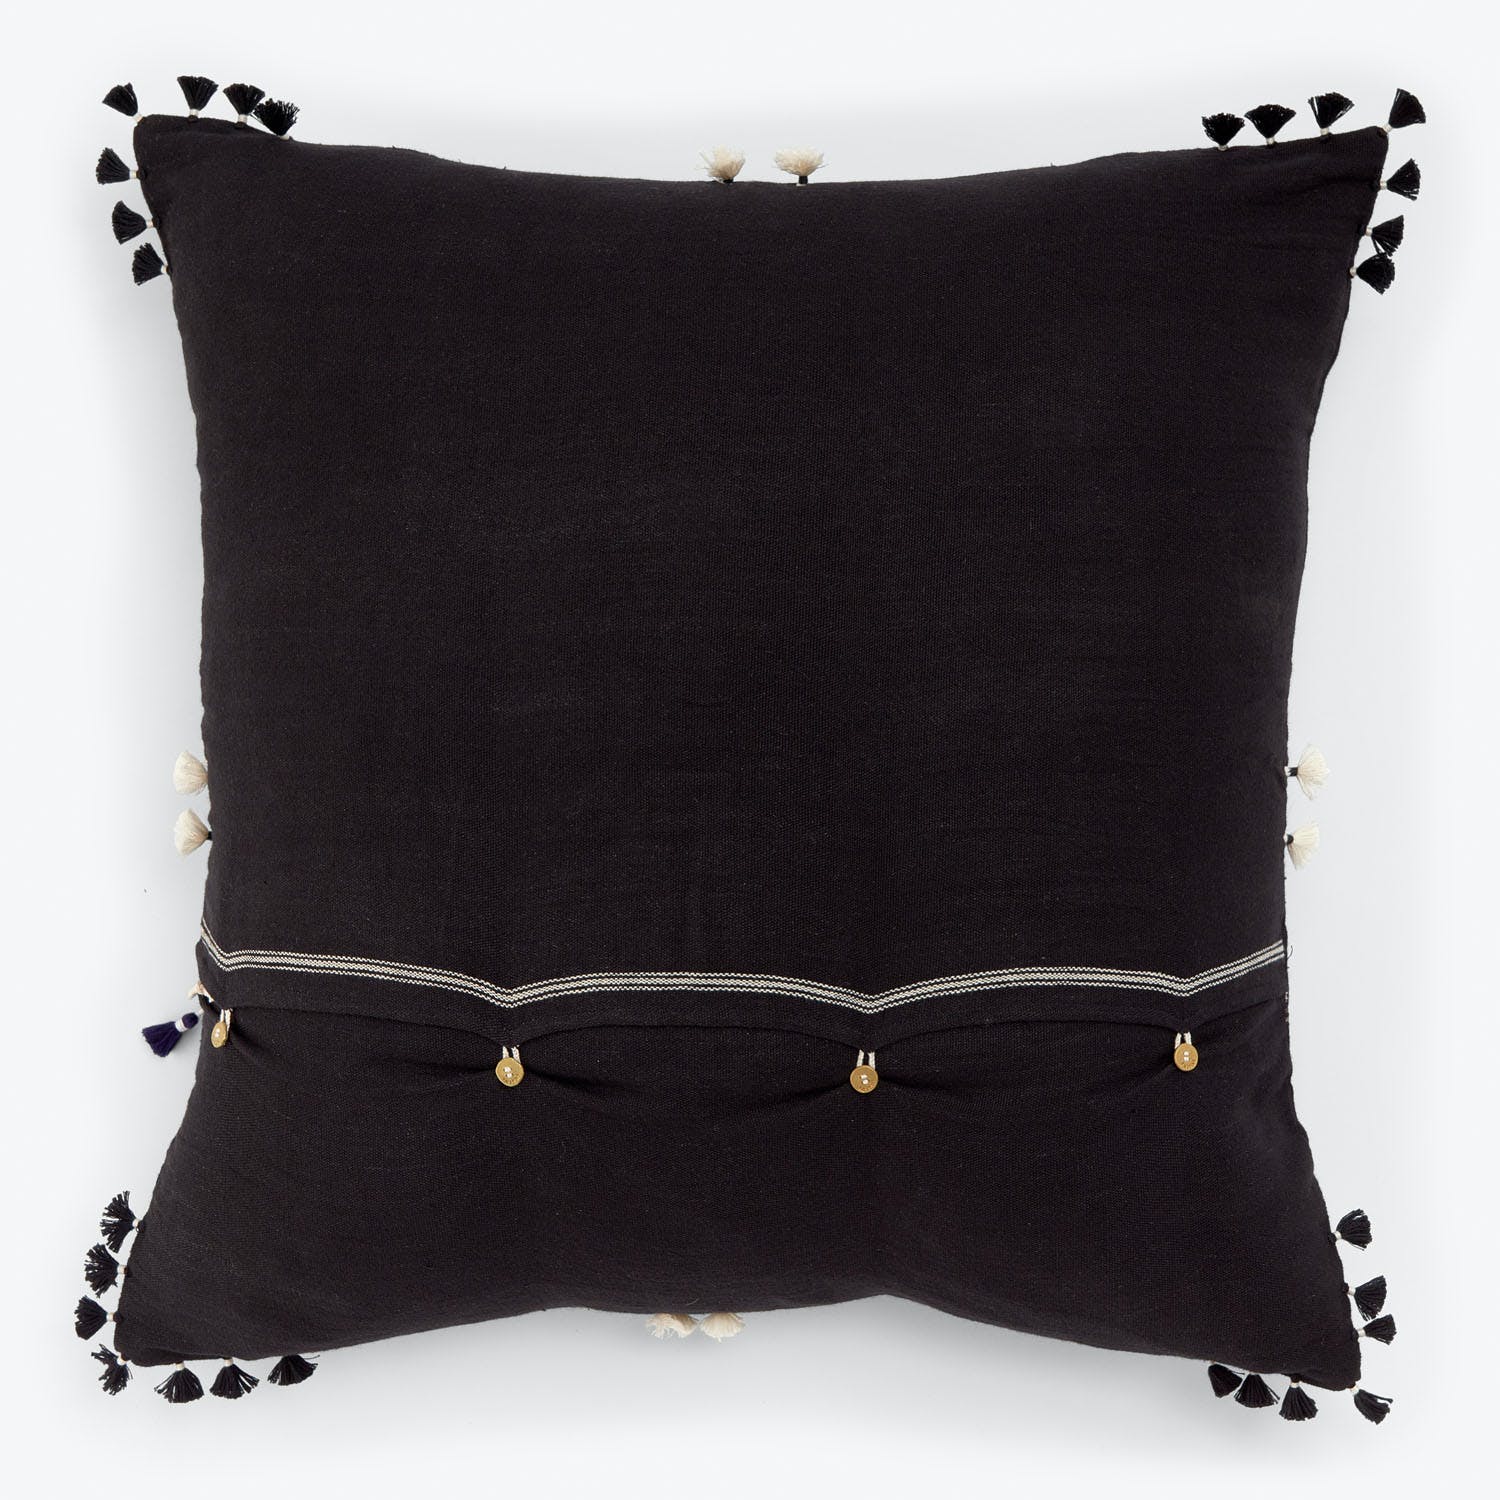 Square decorative pillow with black and off-white tassels and beads.